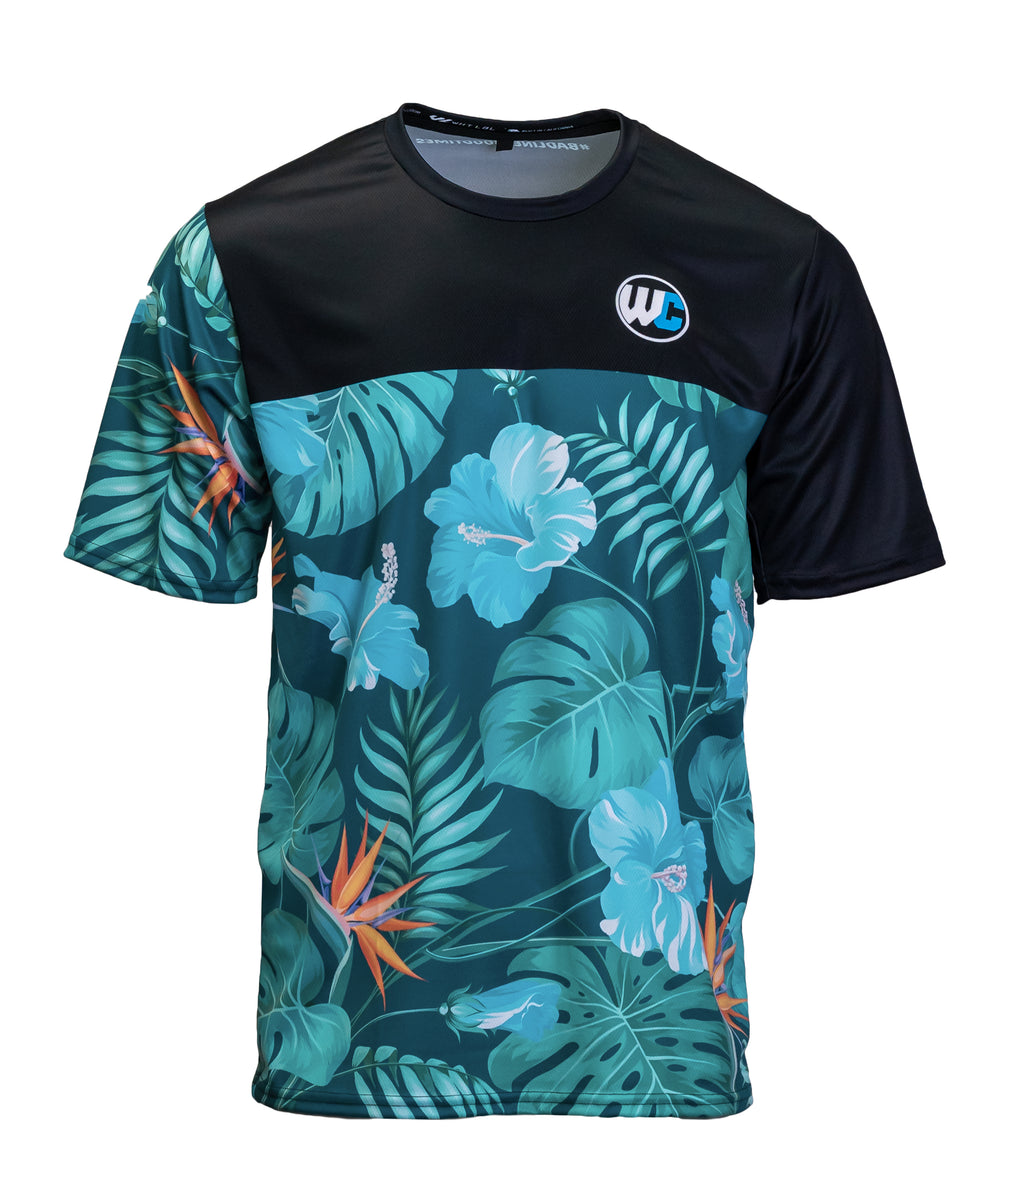 Worldwide Cyclery Jersey - Party V2 Short Sleeve, Small